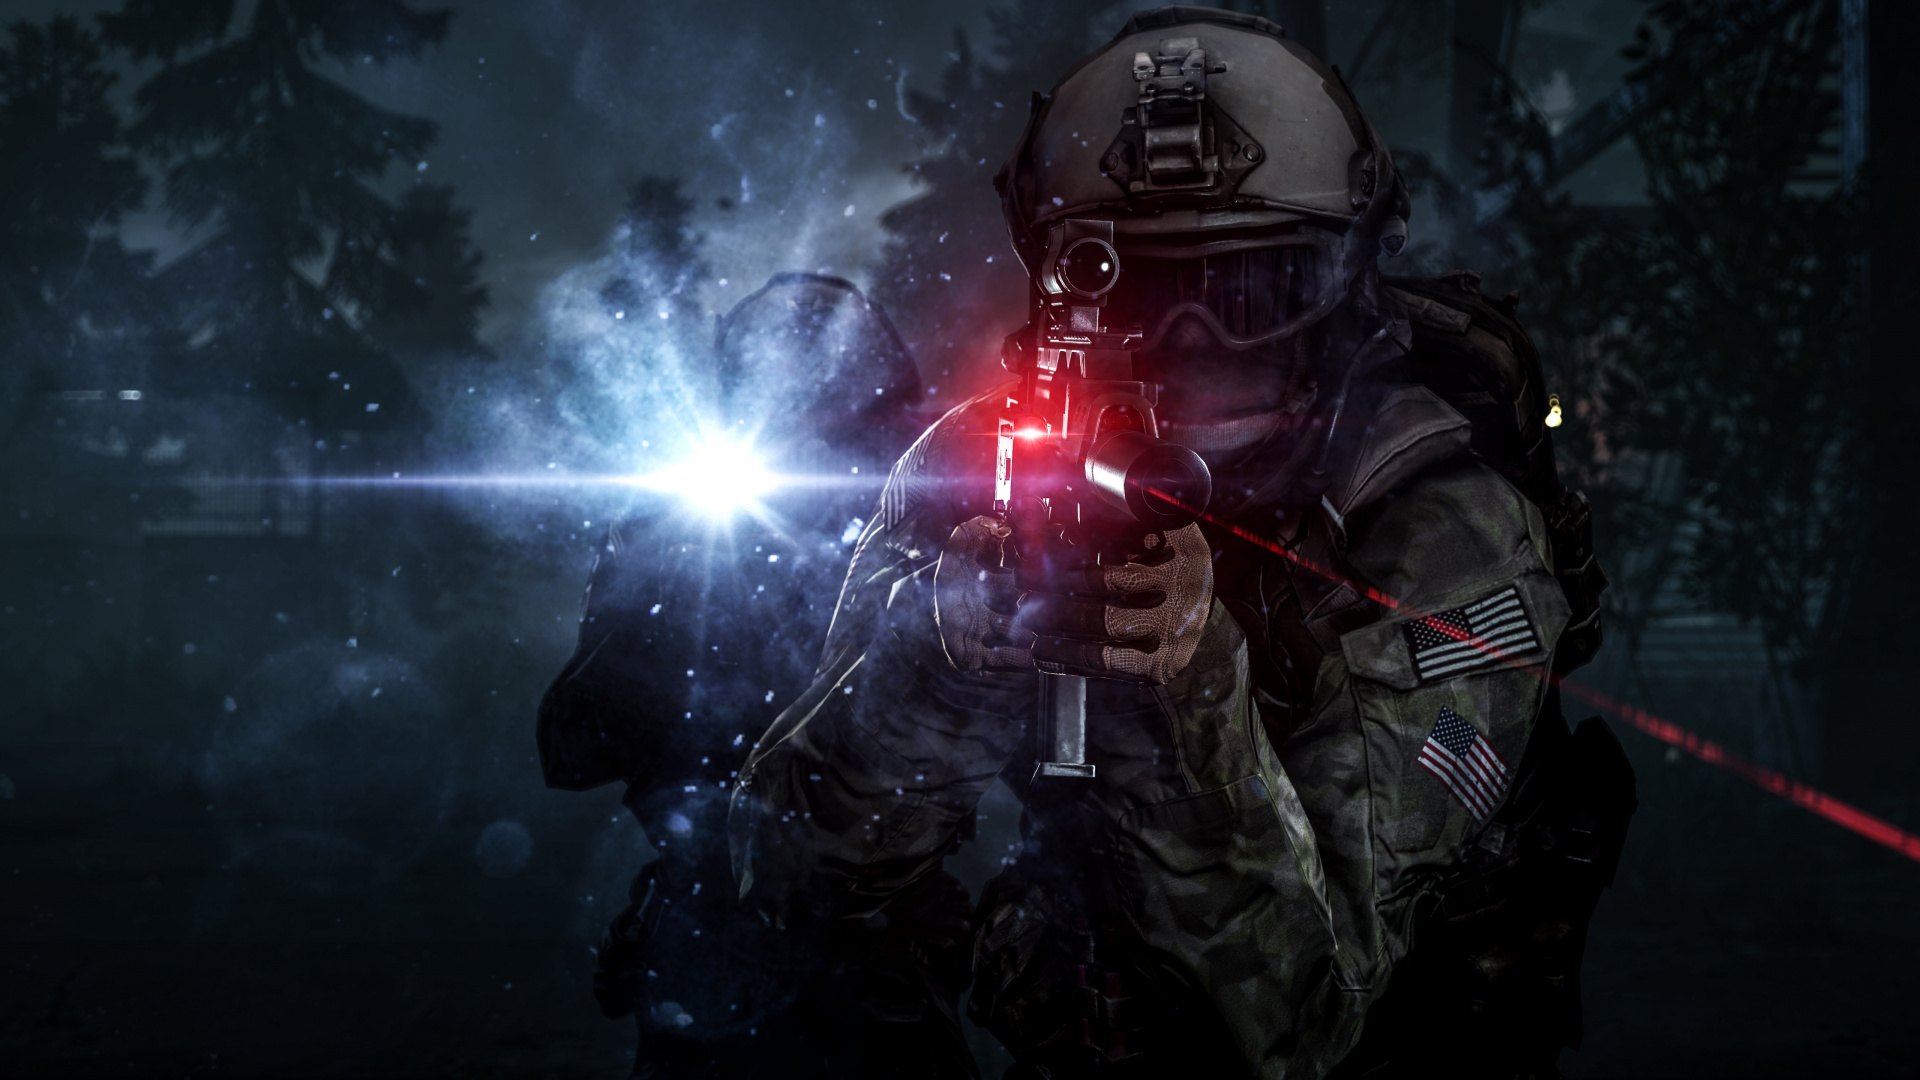 pc Game, Darkness, Space, Android, Battlefield 4. Wallpaper in 1920x1080 Resolution